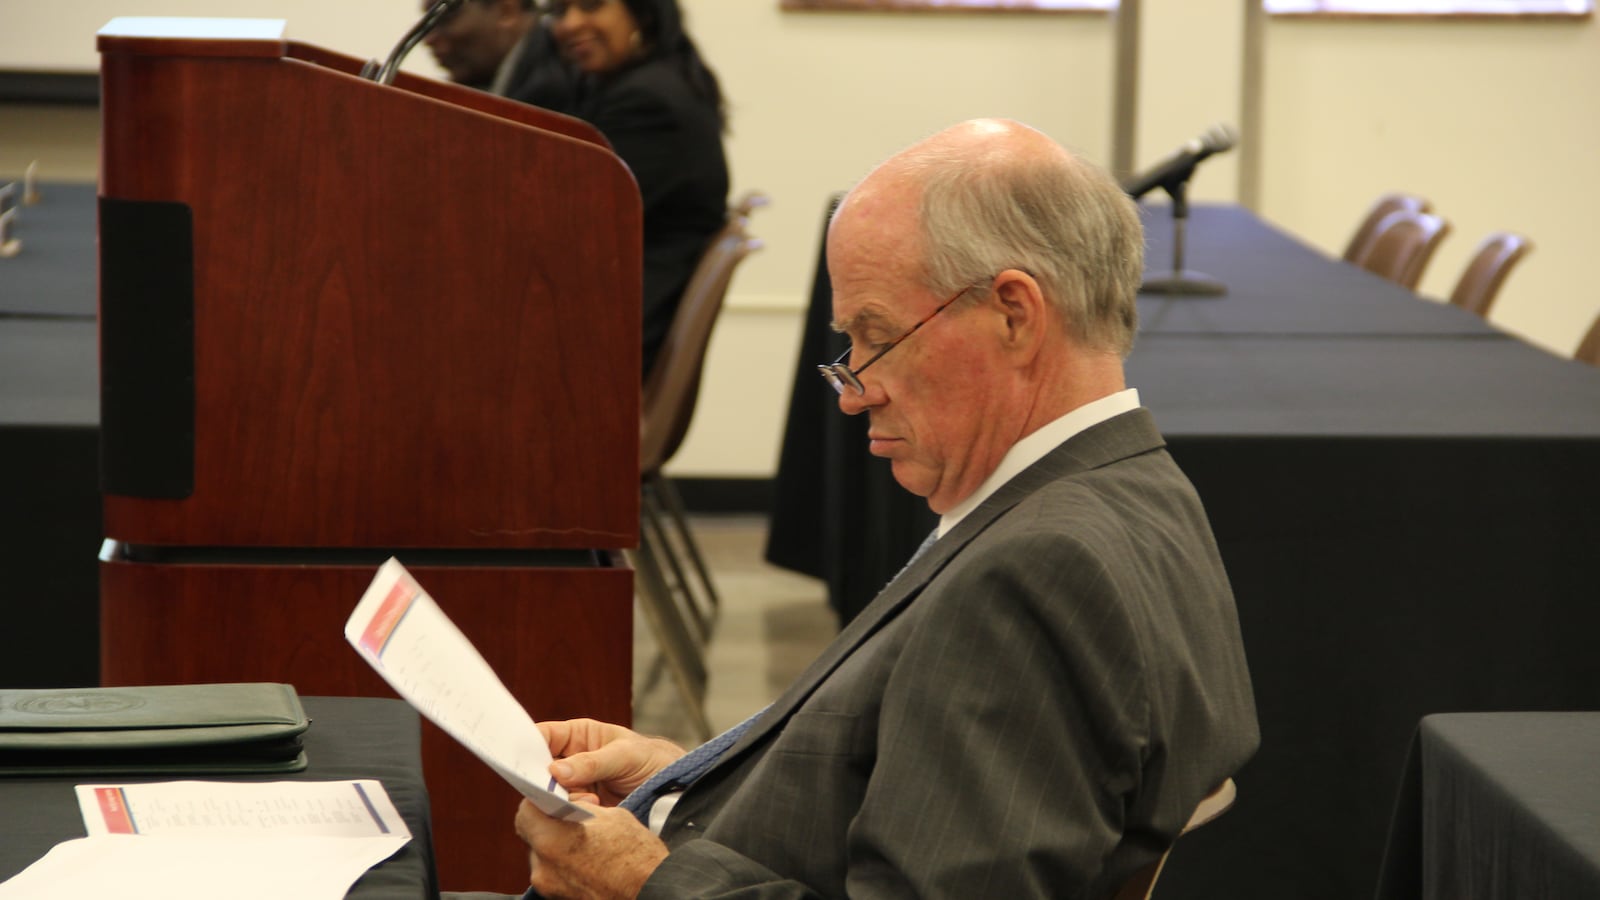 Shelby County budget director Mike Swift studies information presented by leaders of Shelby County Schools during a budget hearing on July 5.